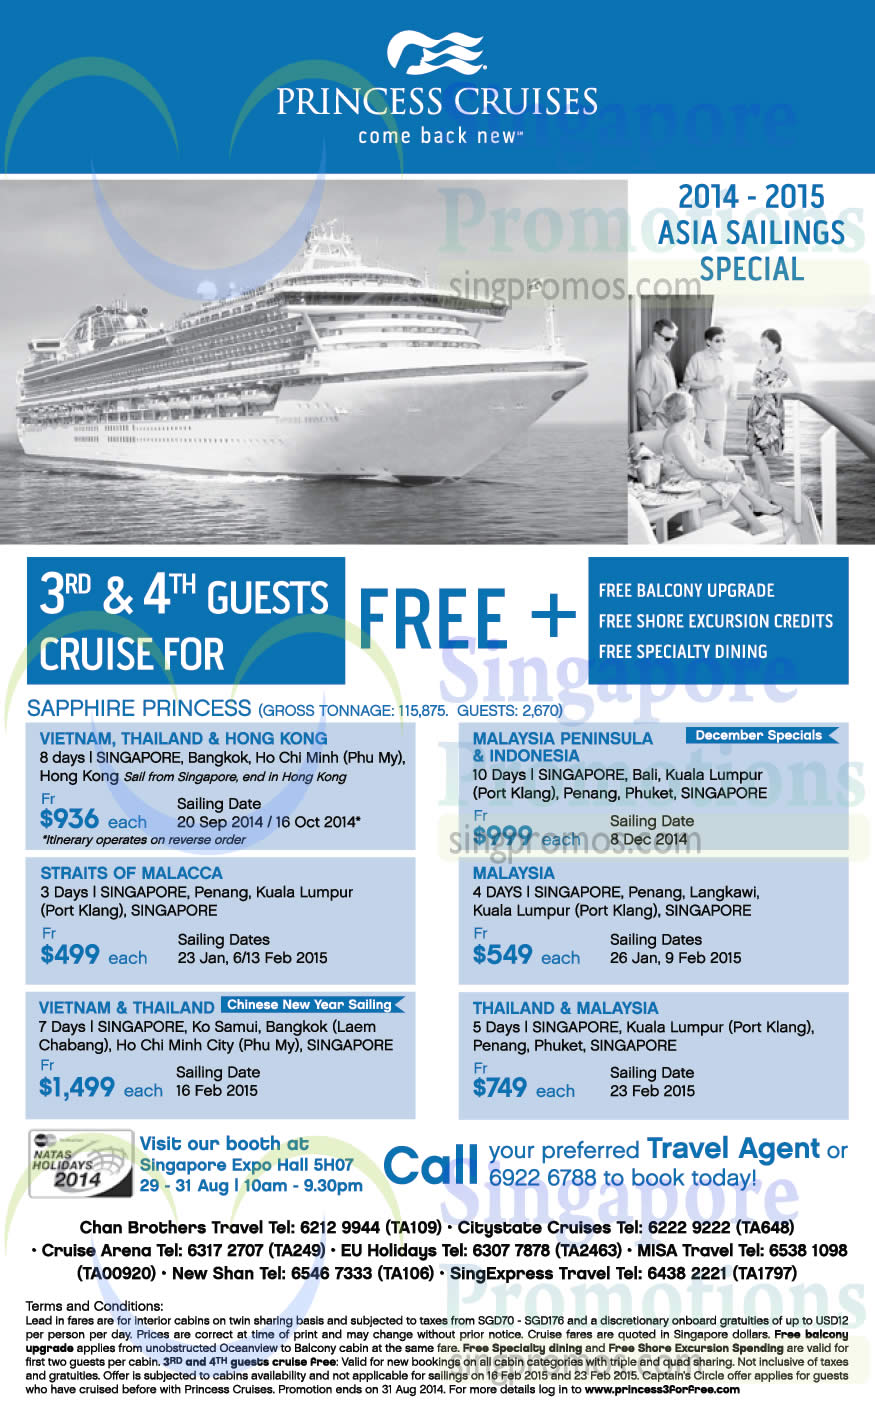 p&o cruises 3rd and 4th guest free